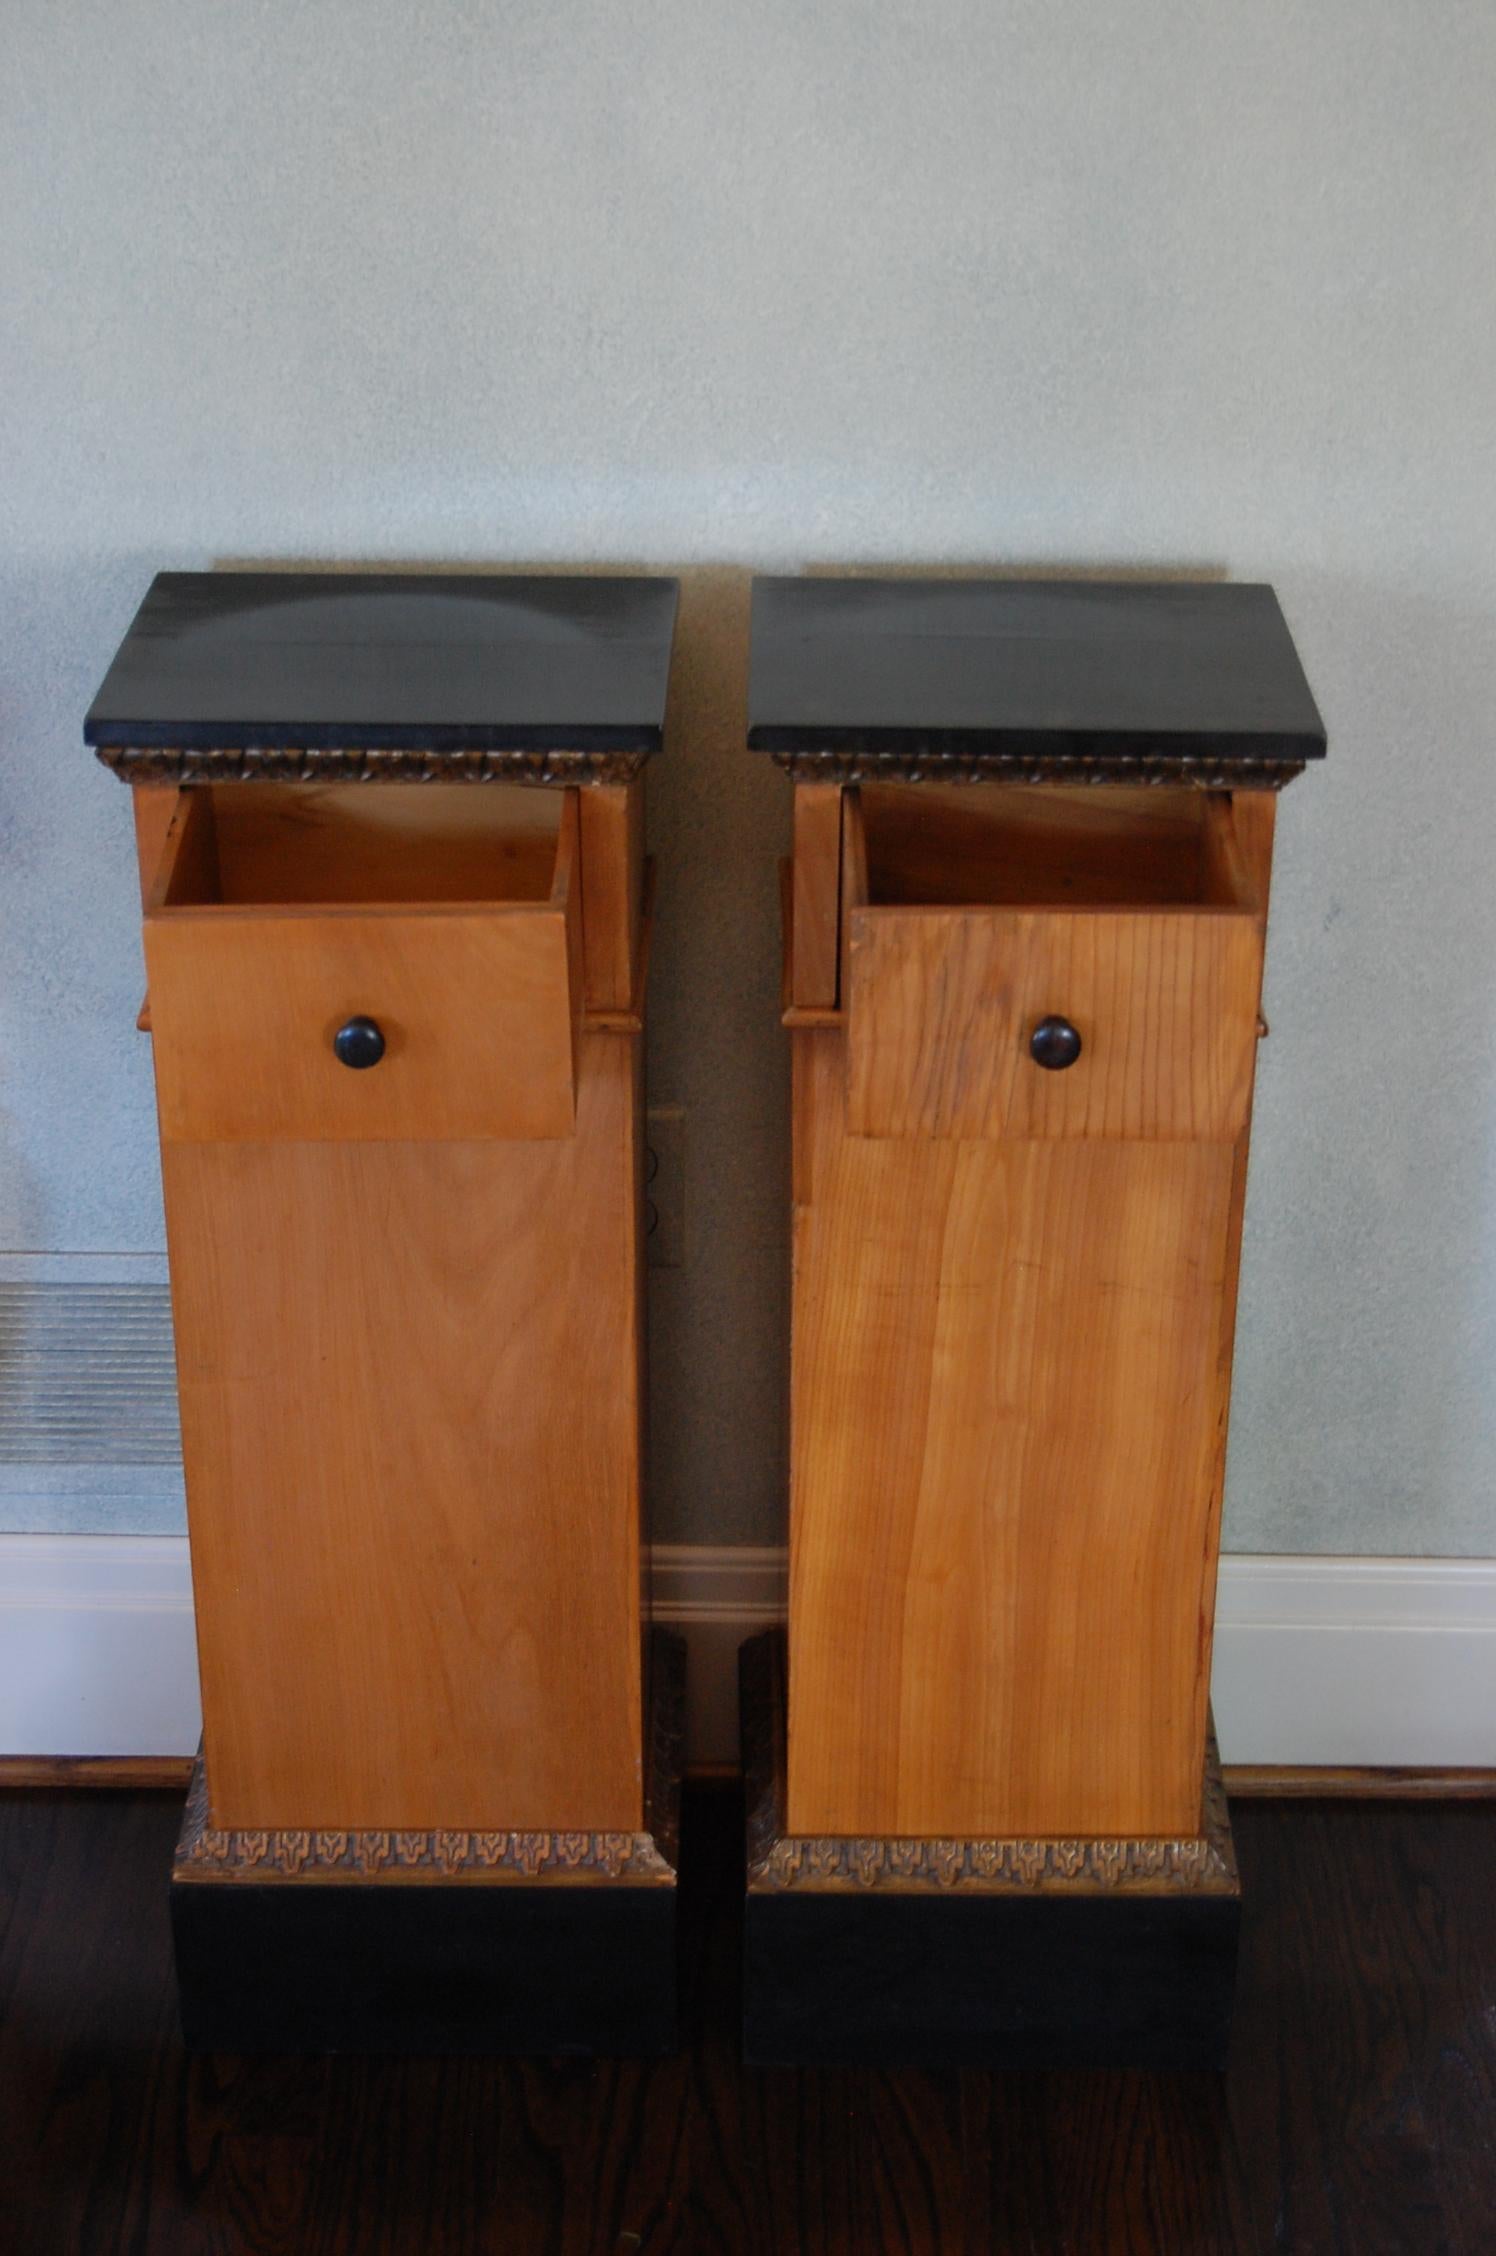 19th Century Pair Biedermeier Pedestals circa 1800-1830 with Black Lacquered Tops & Drawers